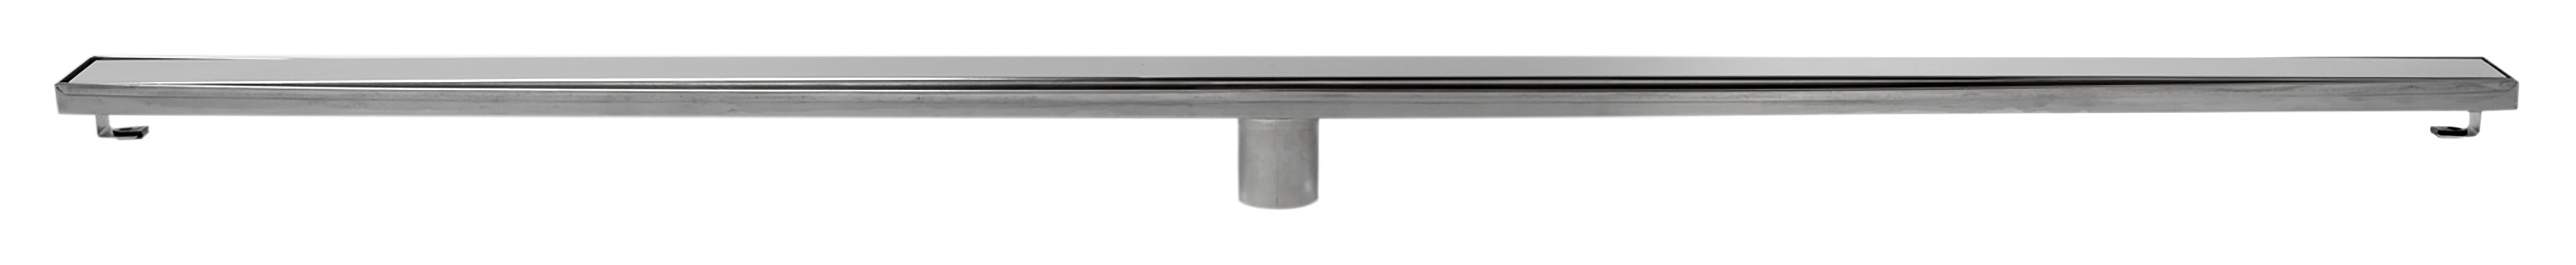 ALFI Brand - 59" Polished Stainless Steel Linear Shower Drain with Solid Cover | ABLD59B-PSS